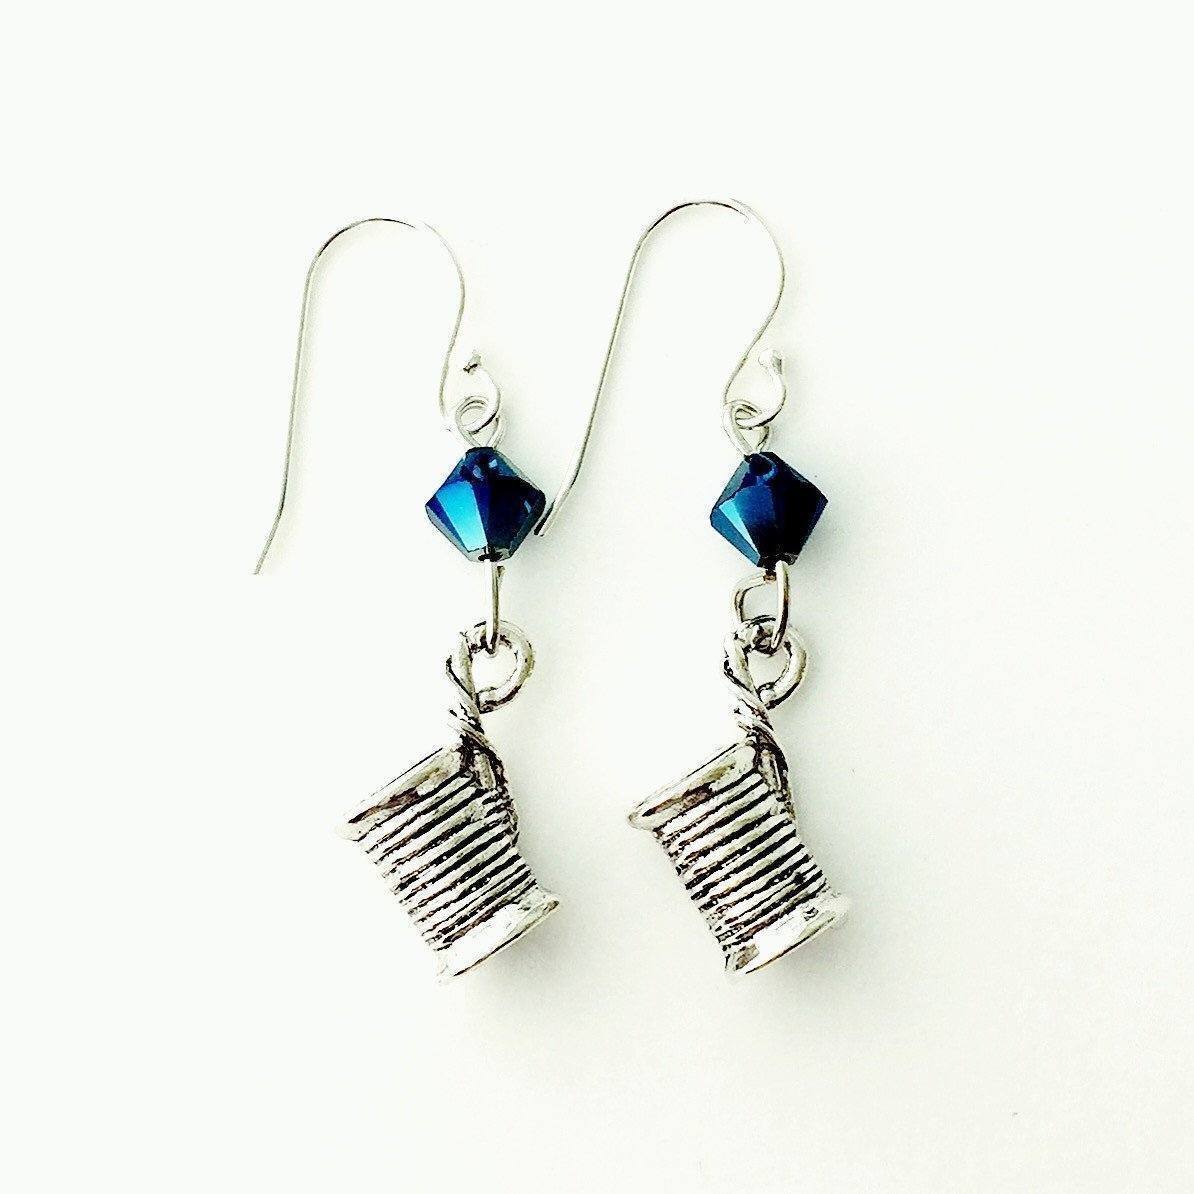 Spool of Thread Silver Earrings with Blue Swarovski Crystals